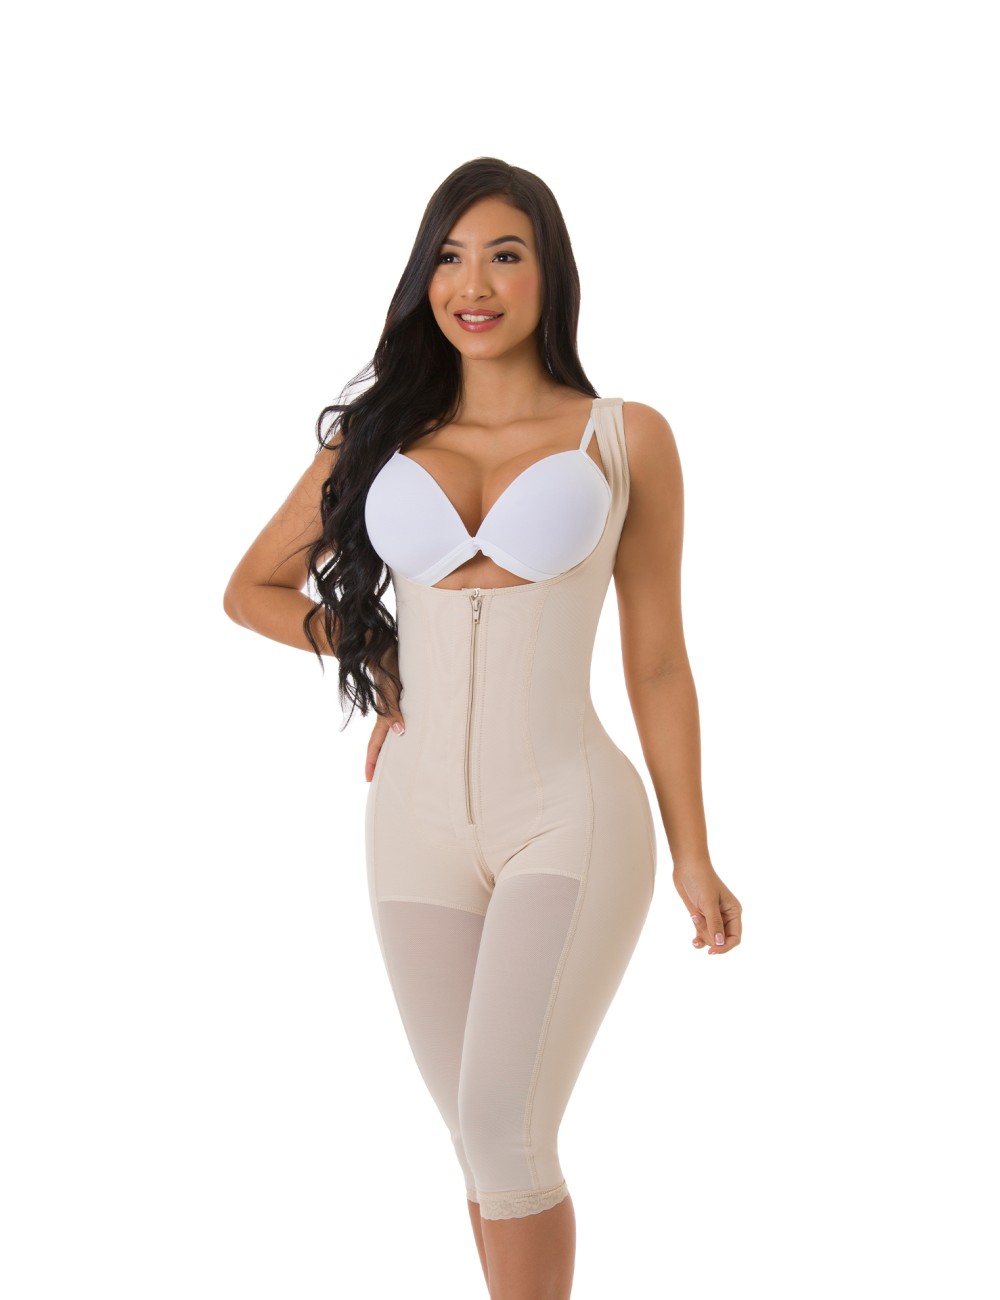 Knee-Length Body Shaper with Firm Compression